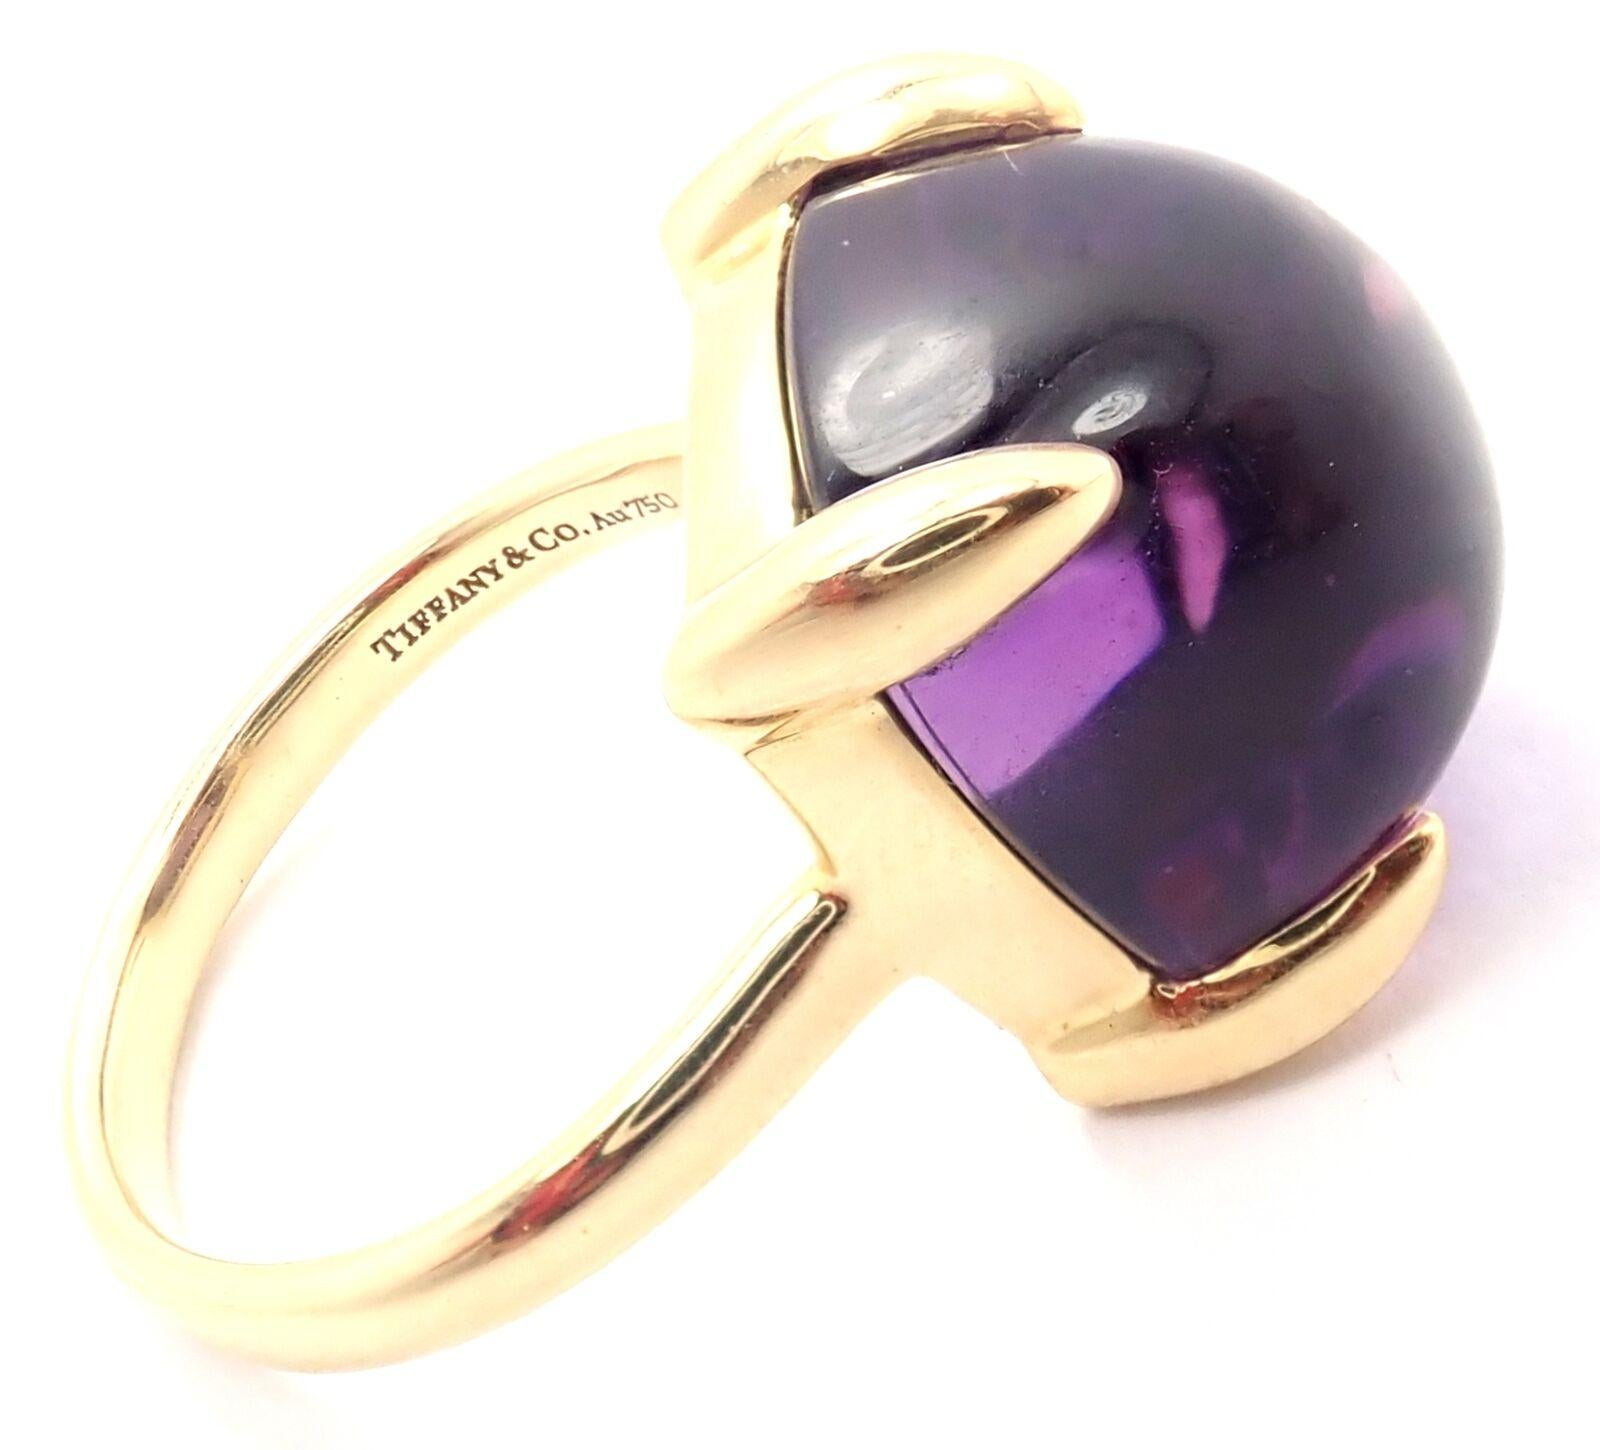 18k Yellow Gold Sugar Stacks Large Amethyst Ring by Paloma Picasso for Tiffany & Co. 
With Large amethyst 13mmx13mm approximately 8ct
Details: 
Ring Size: 5
Weight:  6.1 grams
Width at Top: 13mm
Stamped Hallmarks: Tiffany & Co 750 Paloma